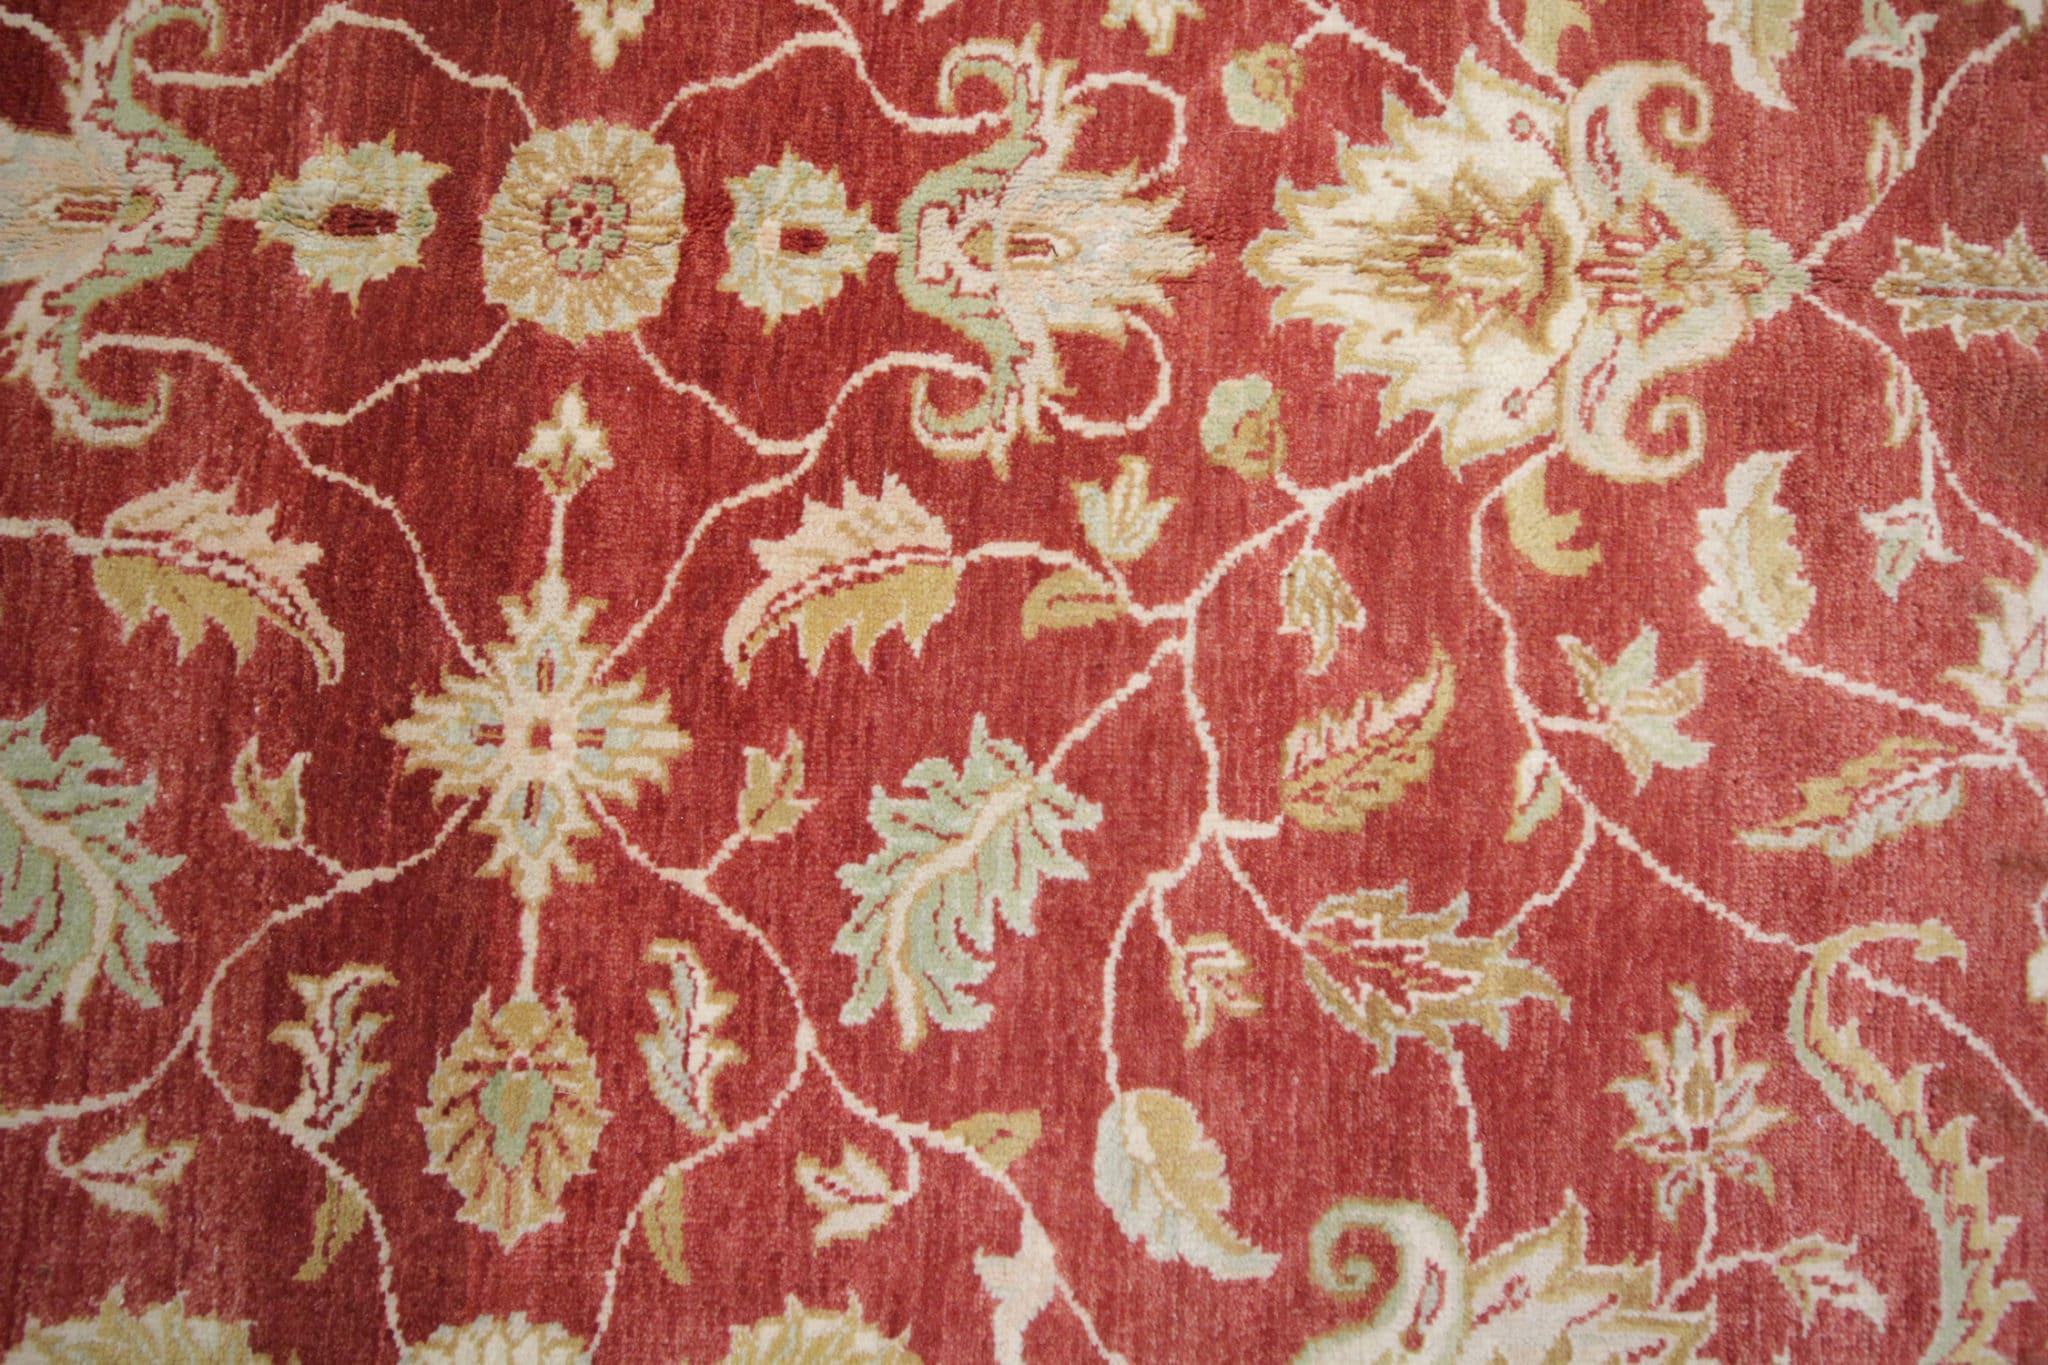 Oriental Rugs, Red Living Room Rugs, Handmade Carpet Floral Ziegler Rugs In Excellent Condition For Sale In Hampshire, GB